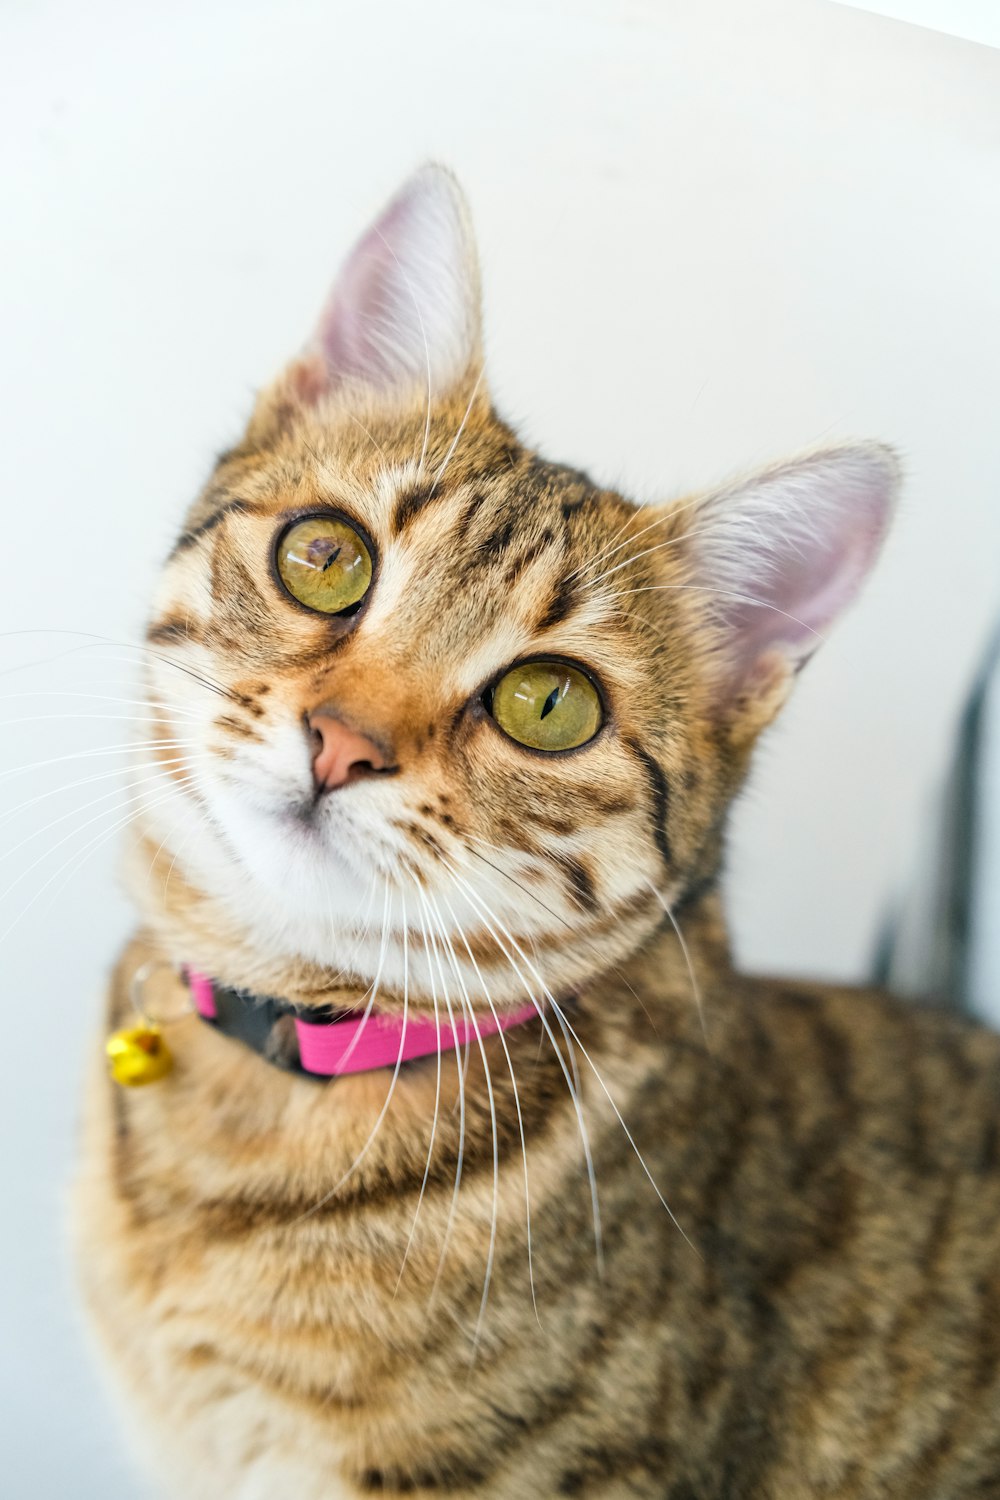 a close up of a cat with a pink collar